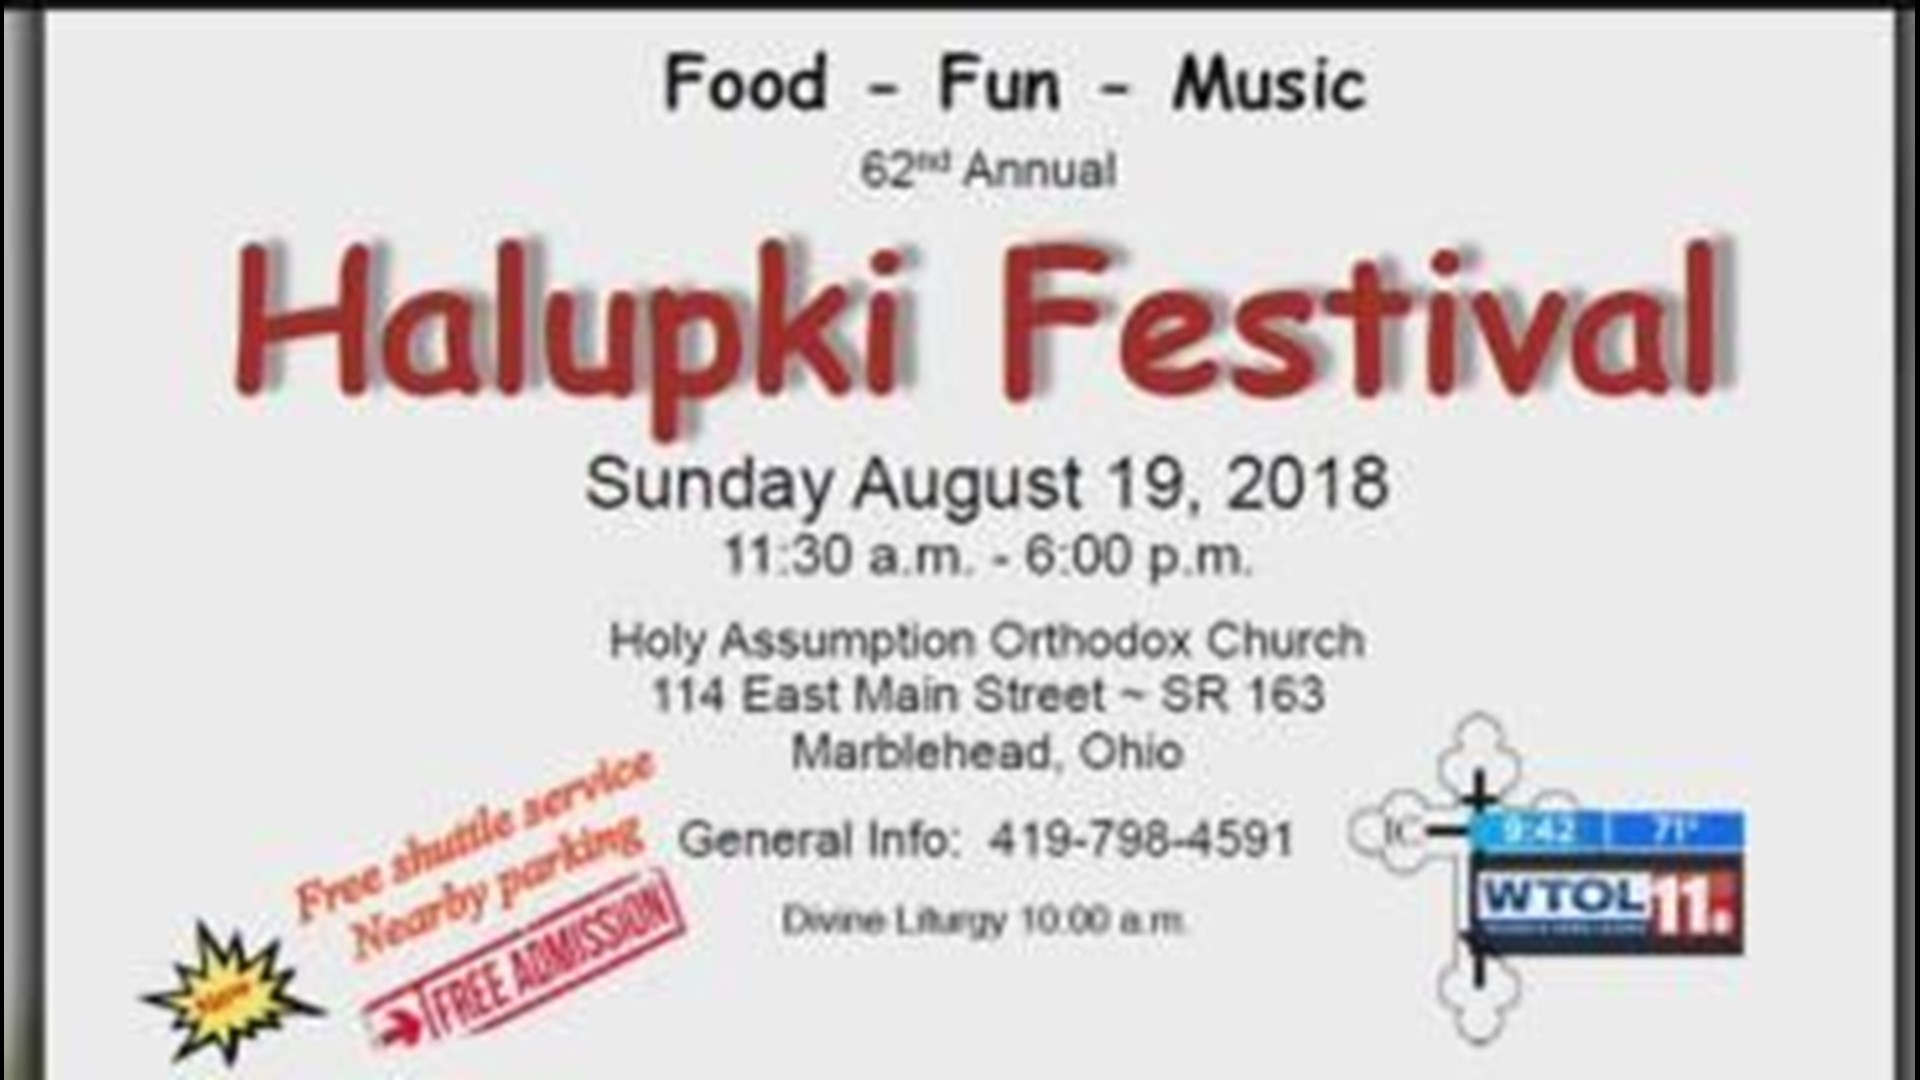 Check out the Halupki Festival this Sunday